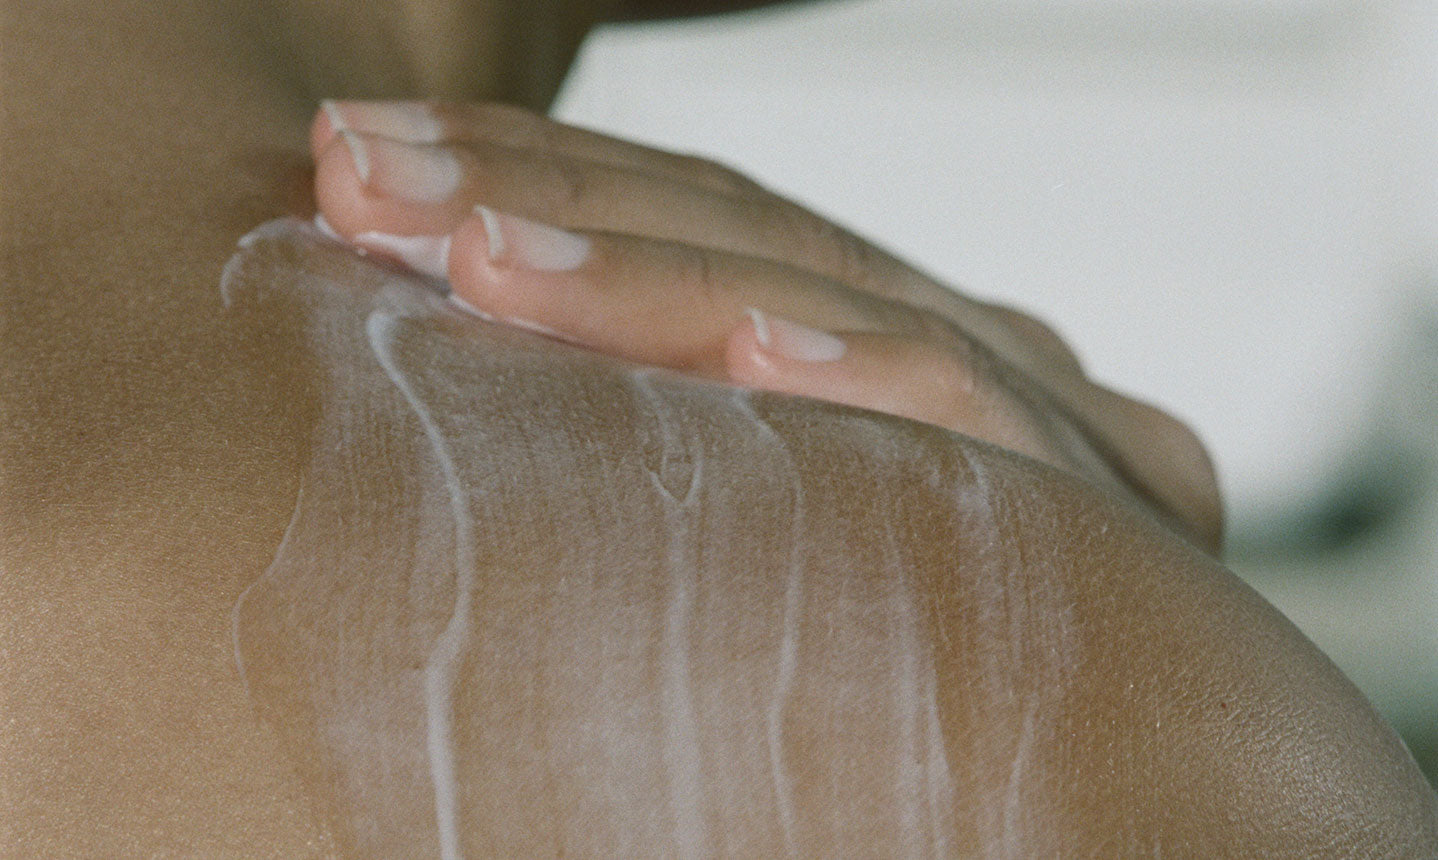 Load video: &lt;p&gt;&lt;span class=&quot;metafield-multi_line_text_field&quot;&gt;Apply a handful of lotion and massage it in circular movements all over the body.&lt;/span&gt;&lt;/p&gt;